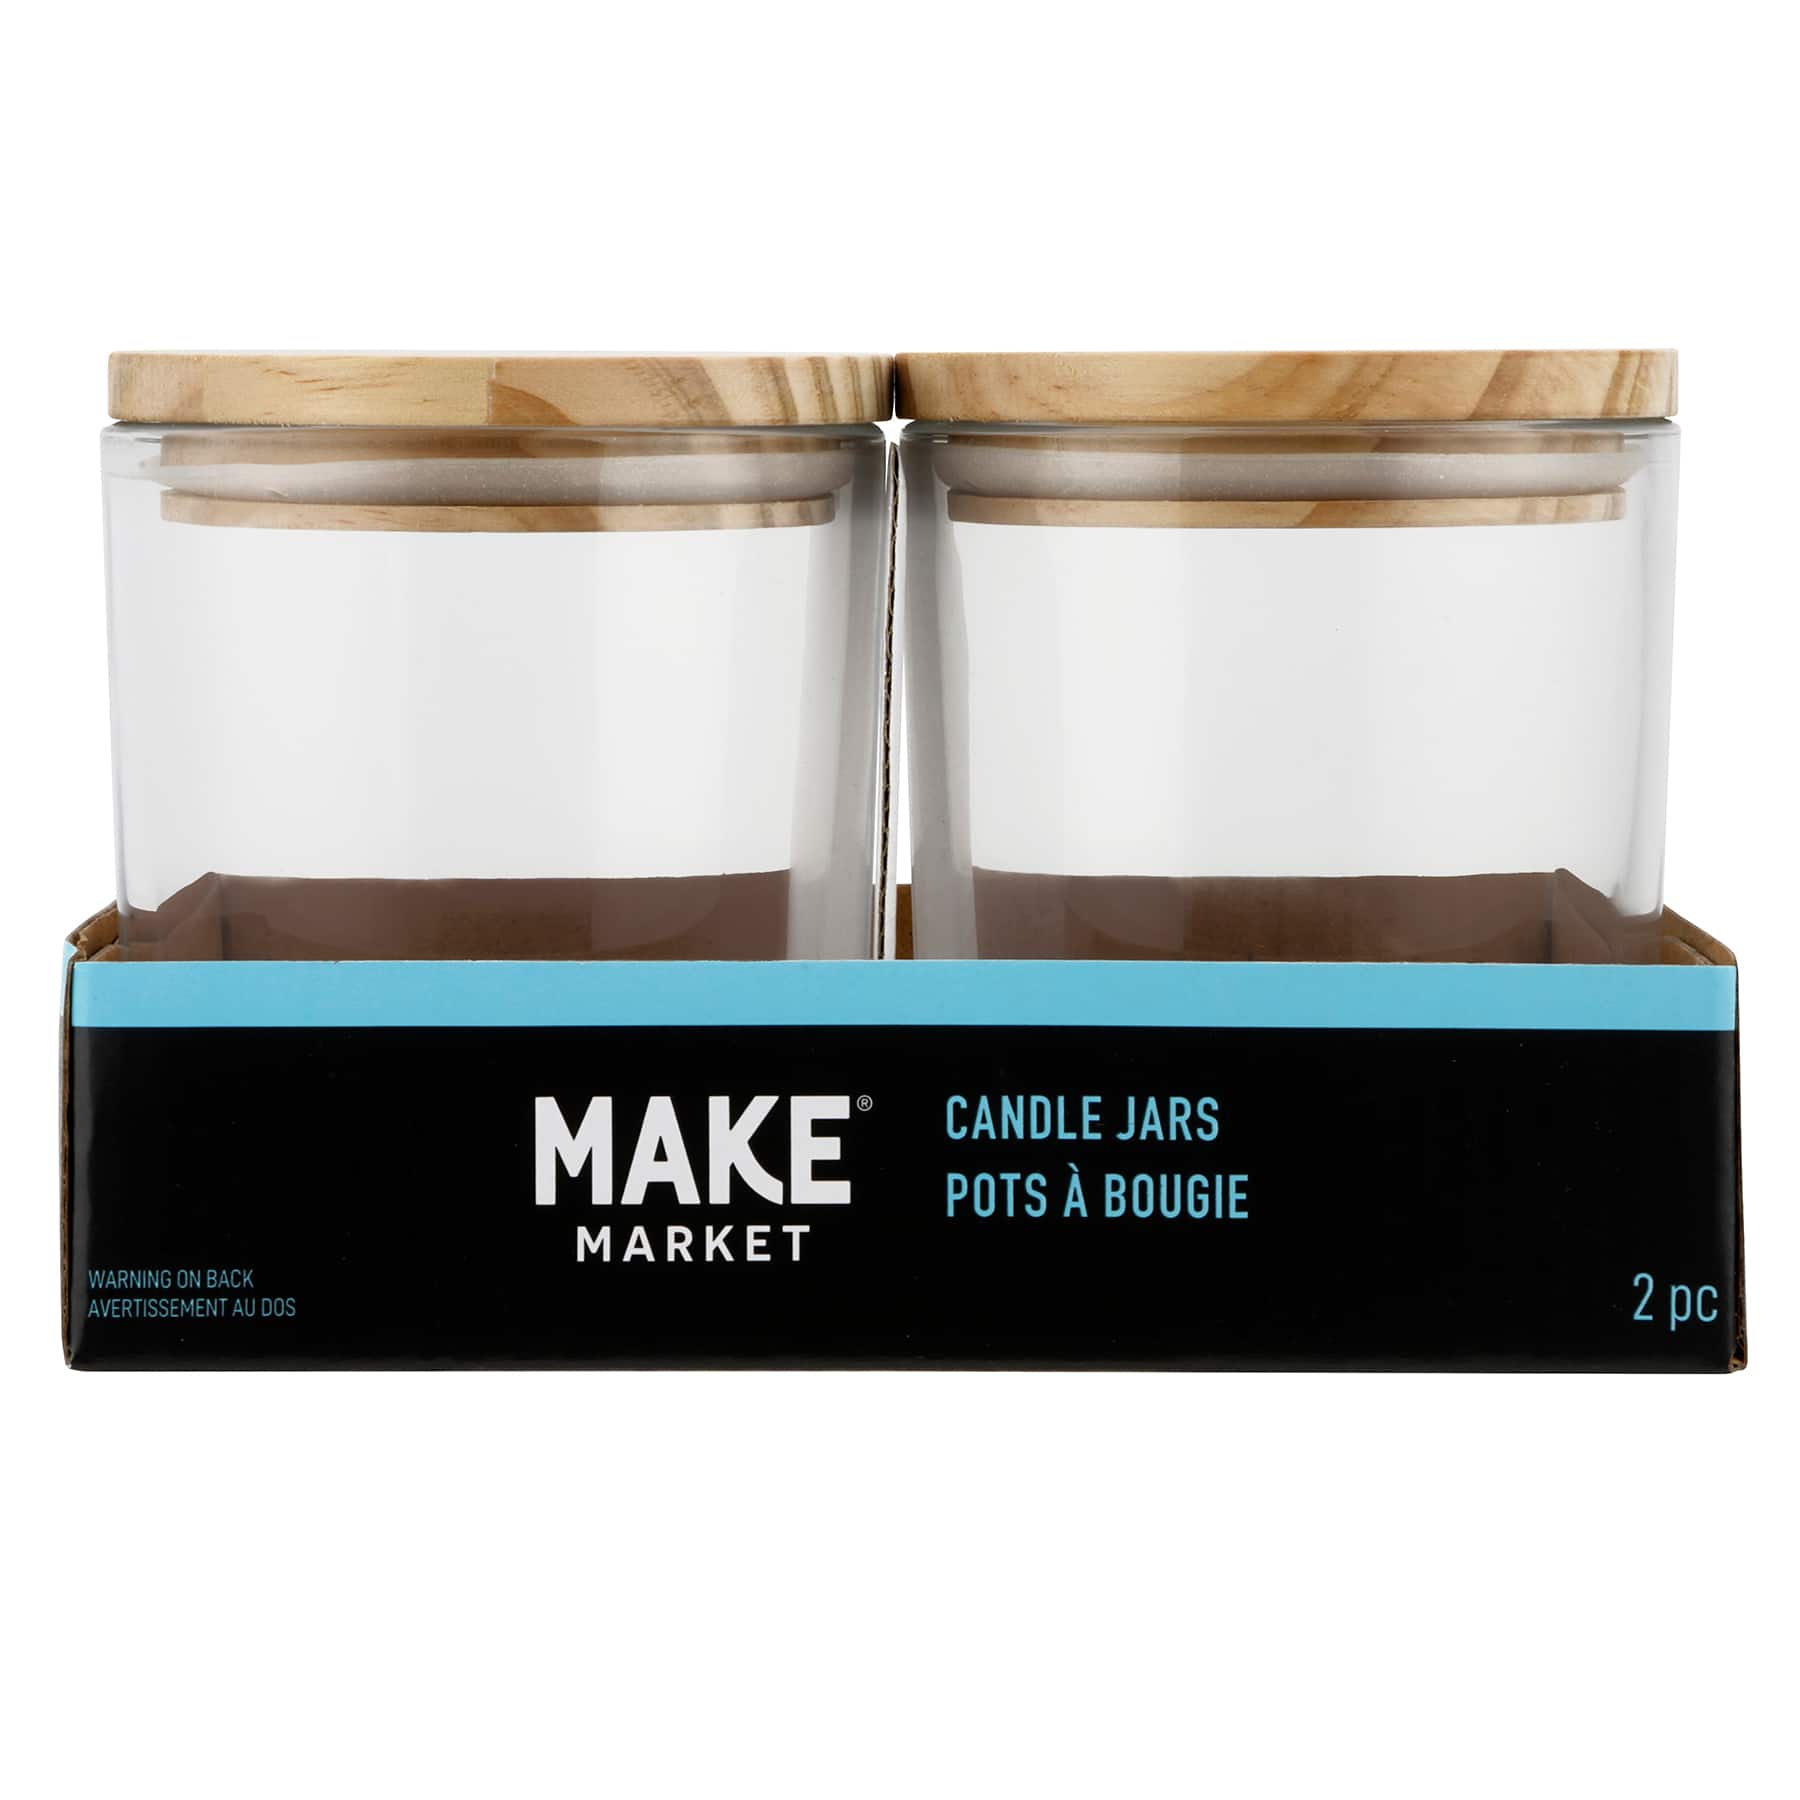 6 Packs: 2 ct. (12 total) 8oz. Clear Candle Jars by Make Market®